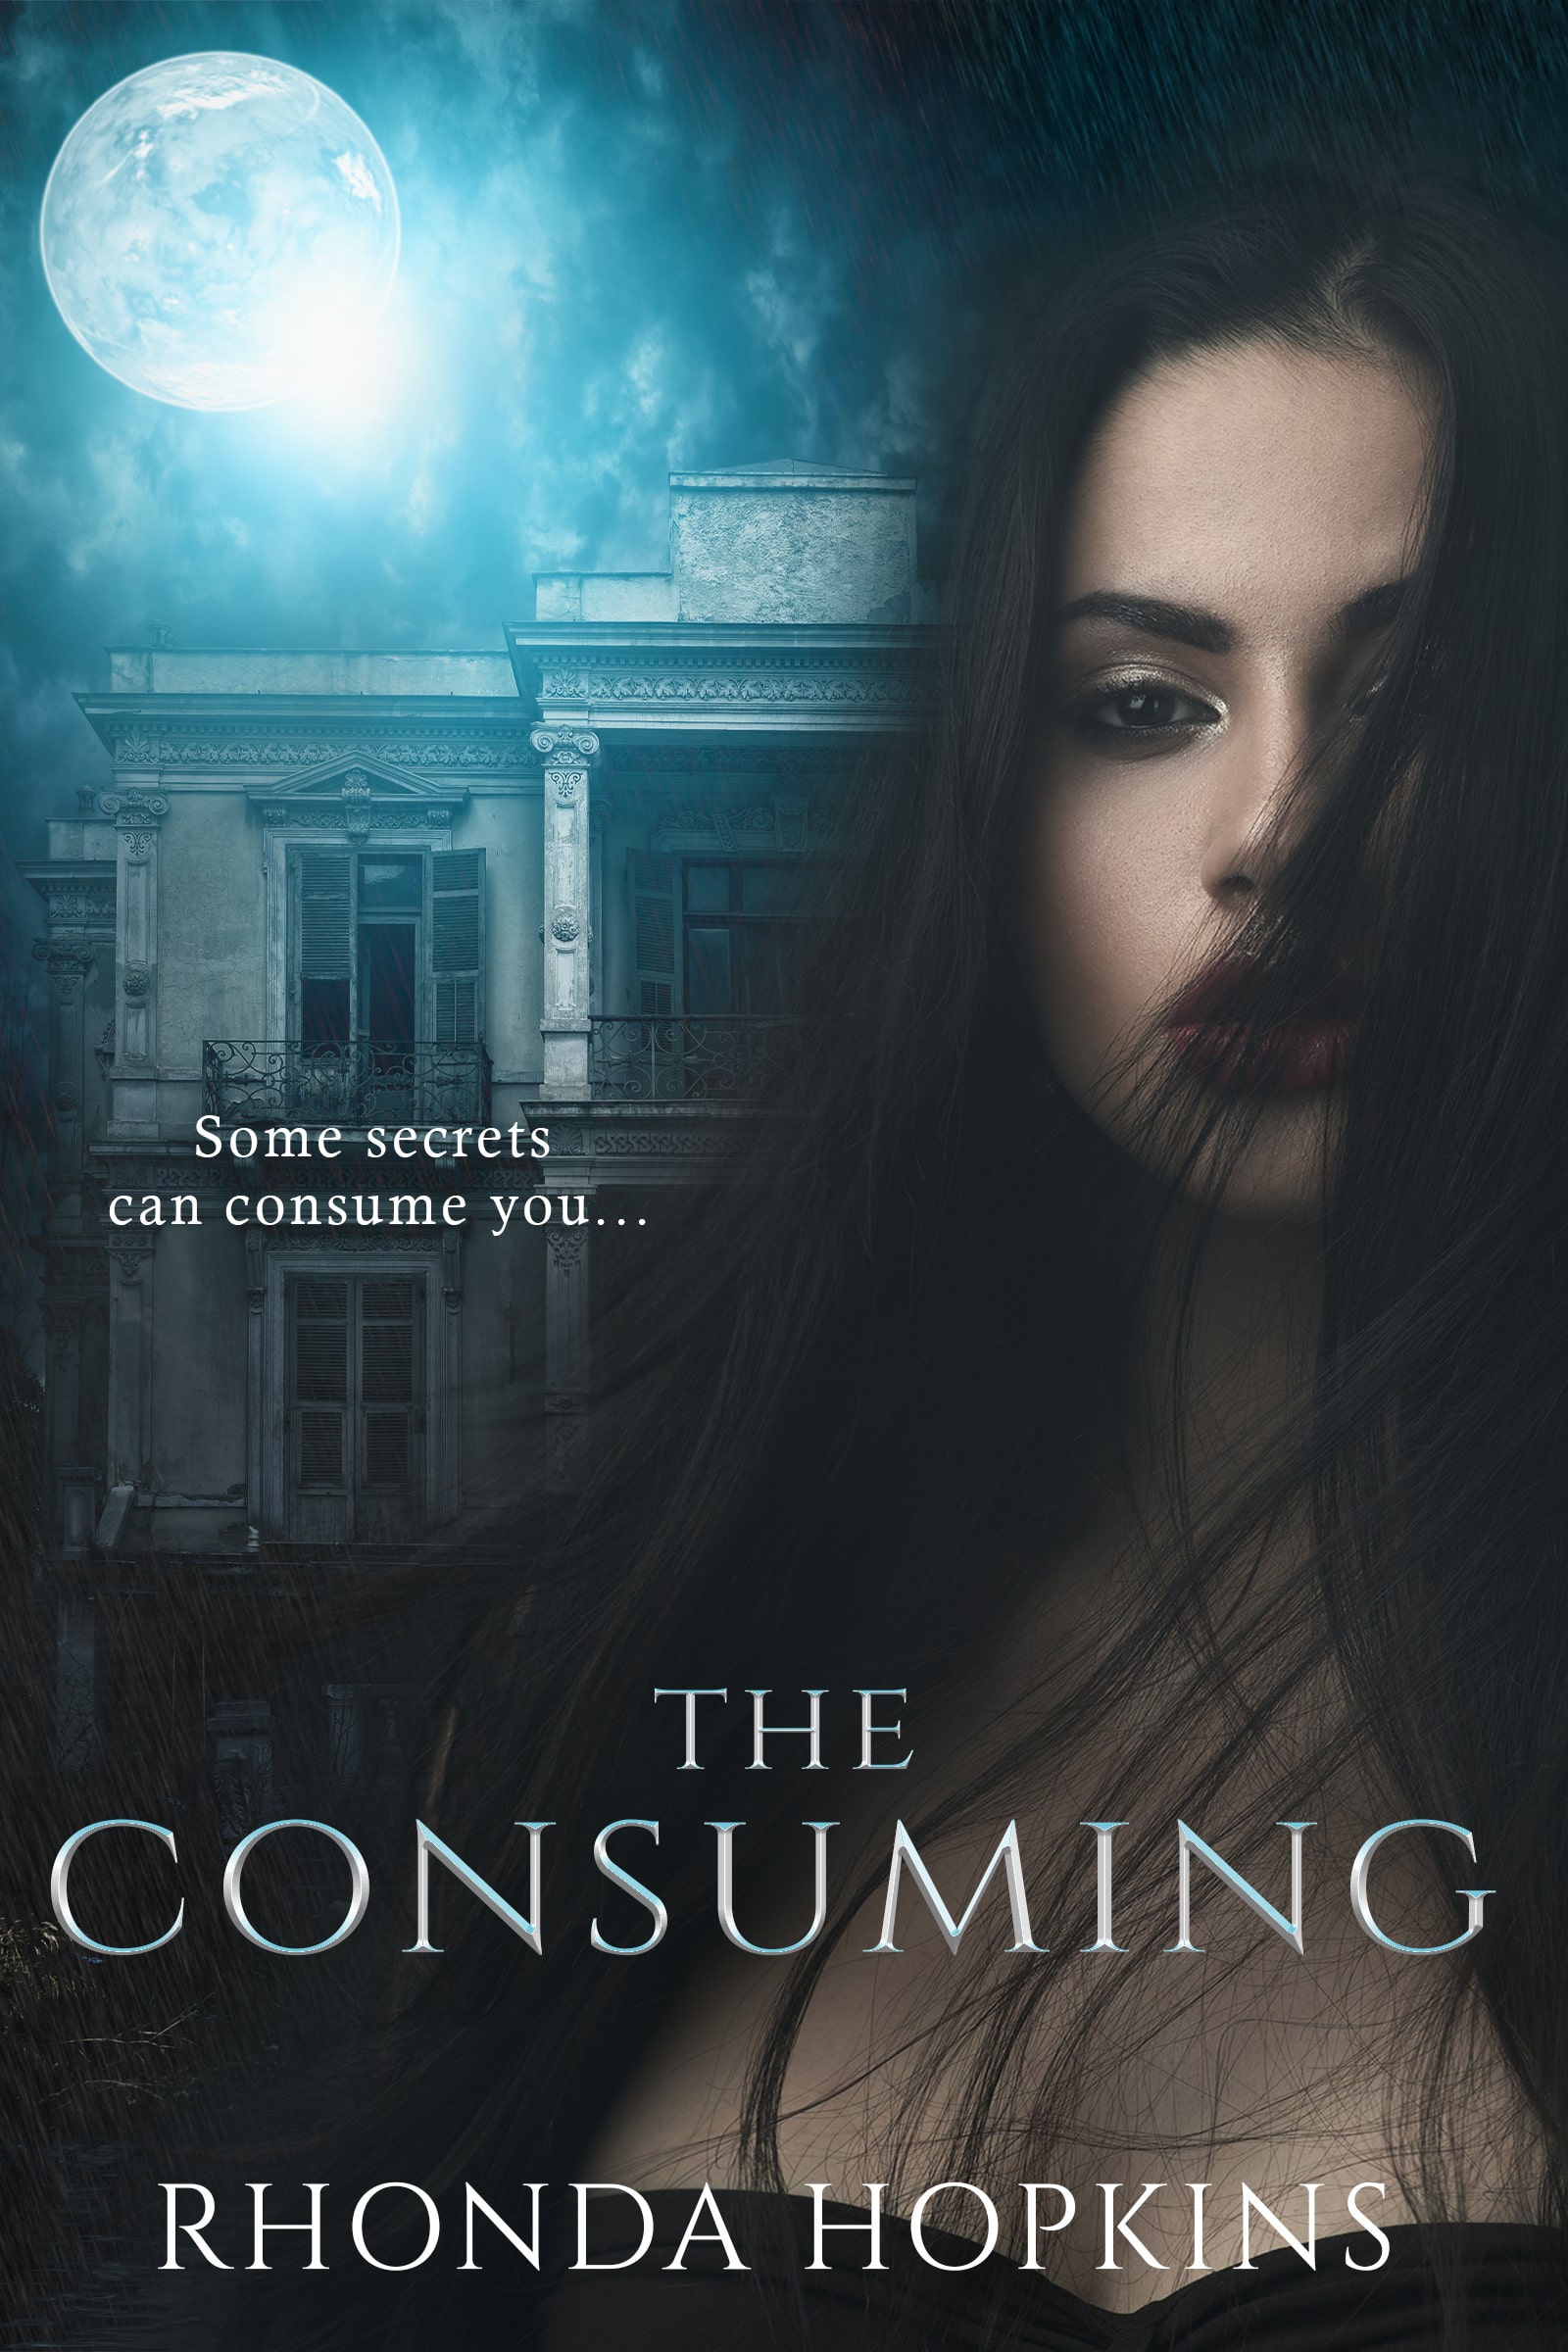 The Consuming by Rhonda Hopkins. A young woman with brown hair blowing in her ace stands in front of a large home. Atmosphere is eerie.